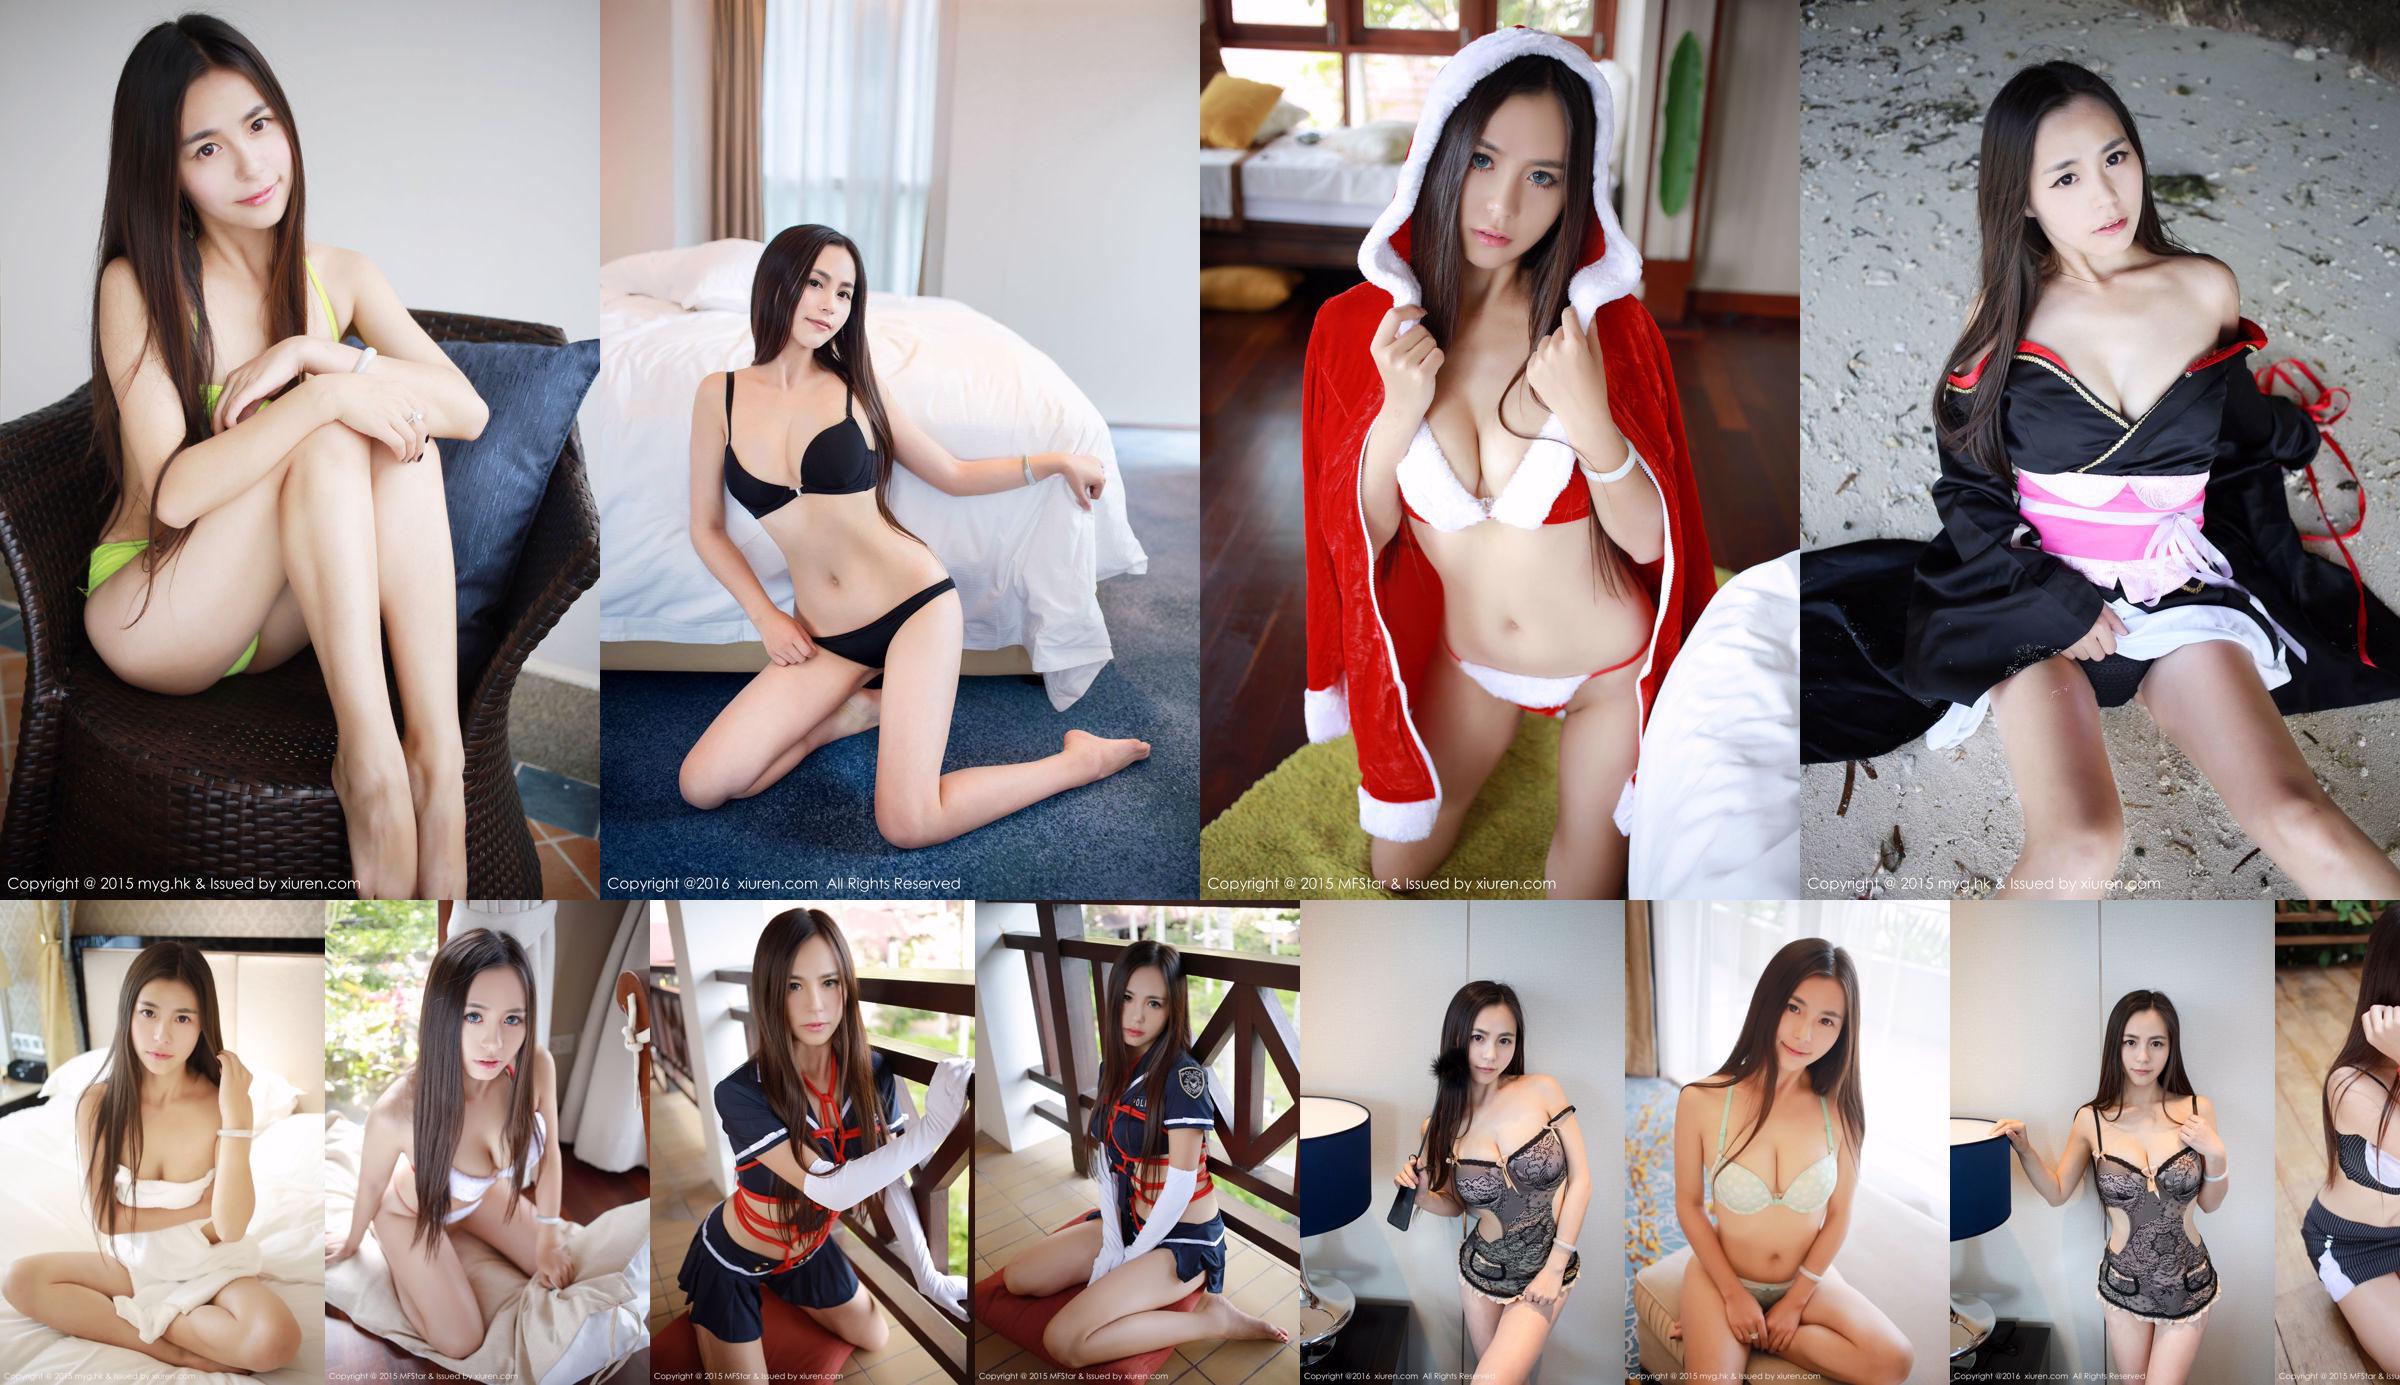 Miss Moa "A New Model from Chengdu, Sichuan" [美媛館MyGirl] Vol.132 No.2b8a78 Page 2